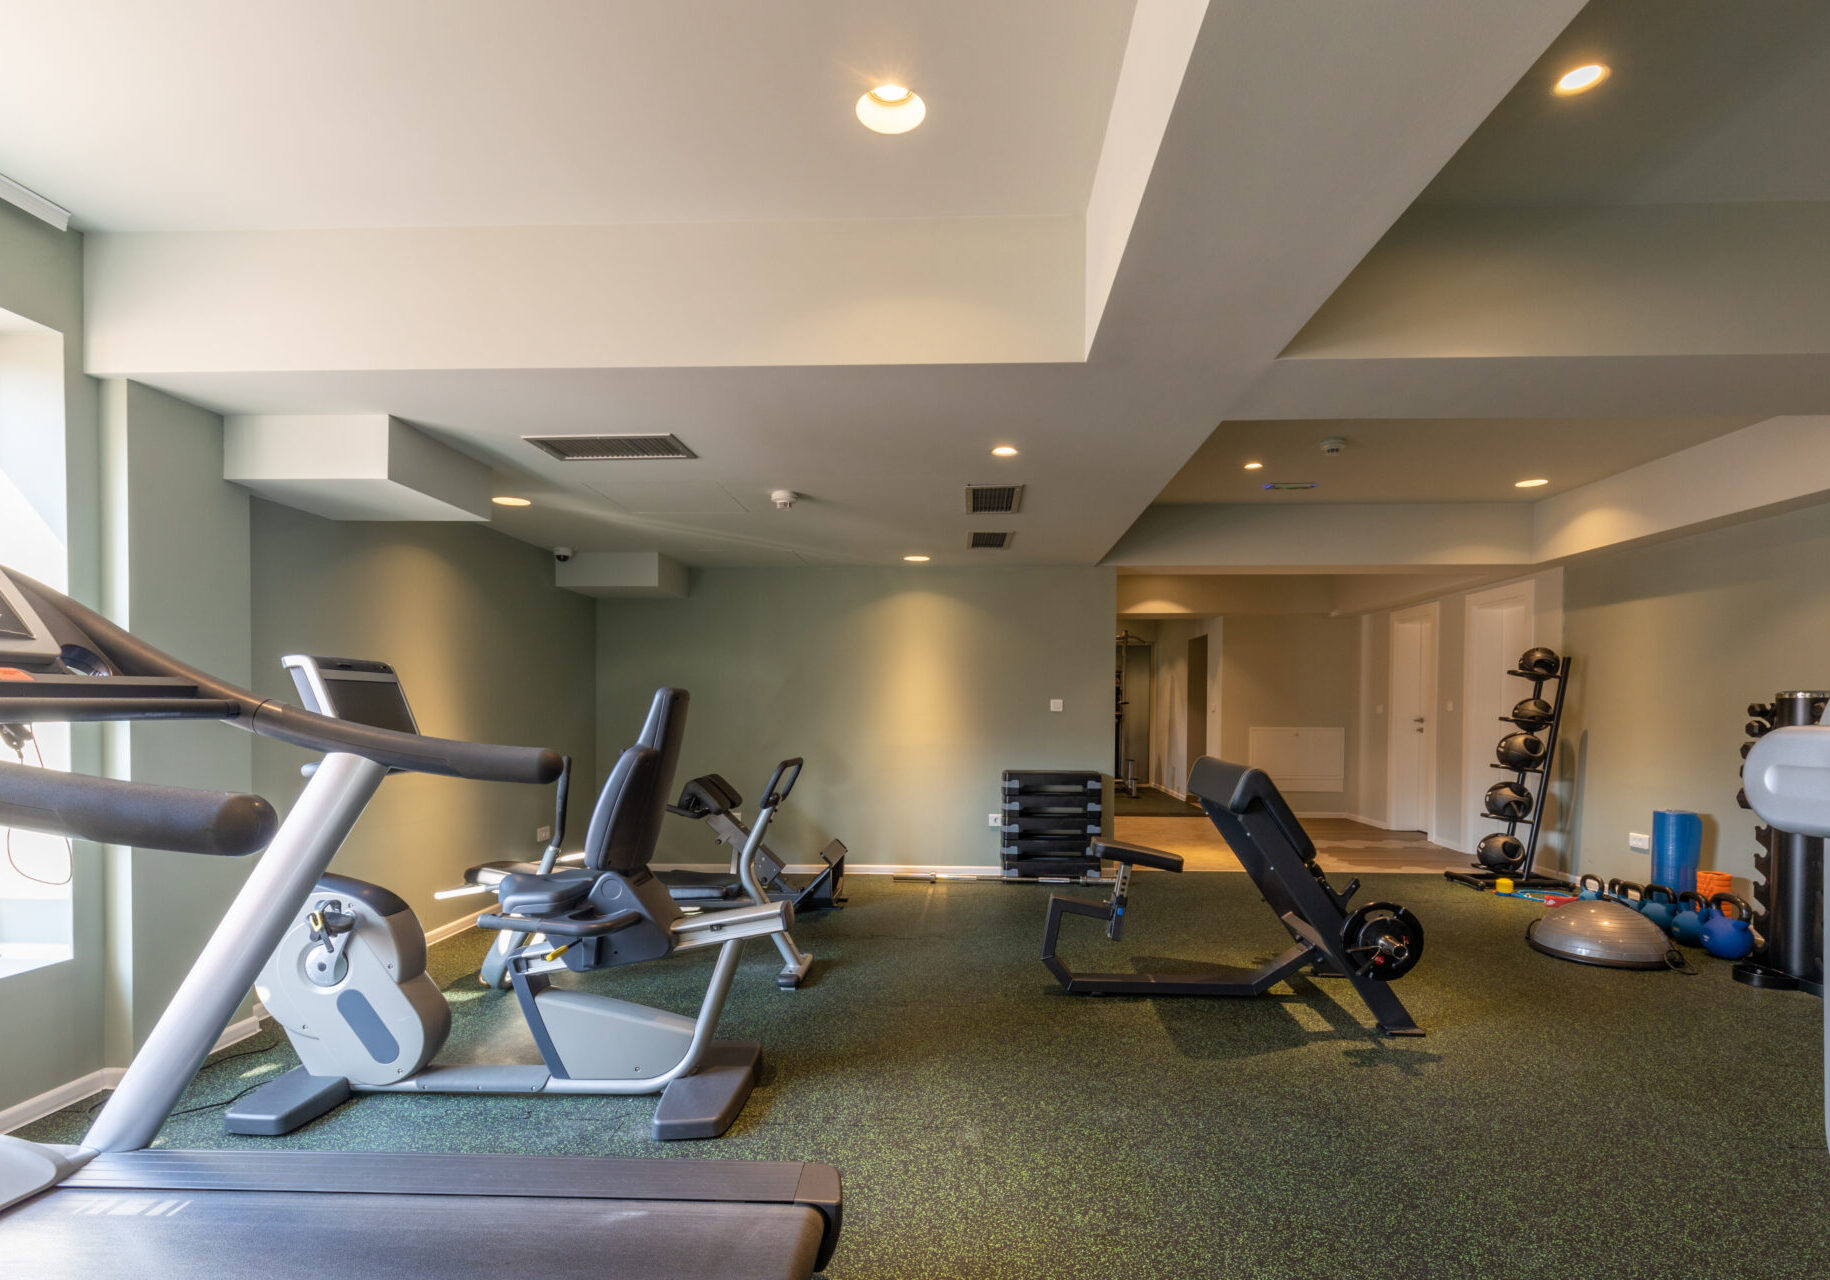 Interior of an empty hotel gym with equipment